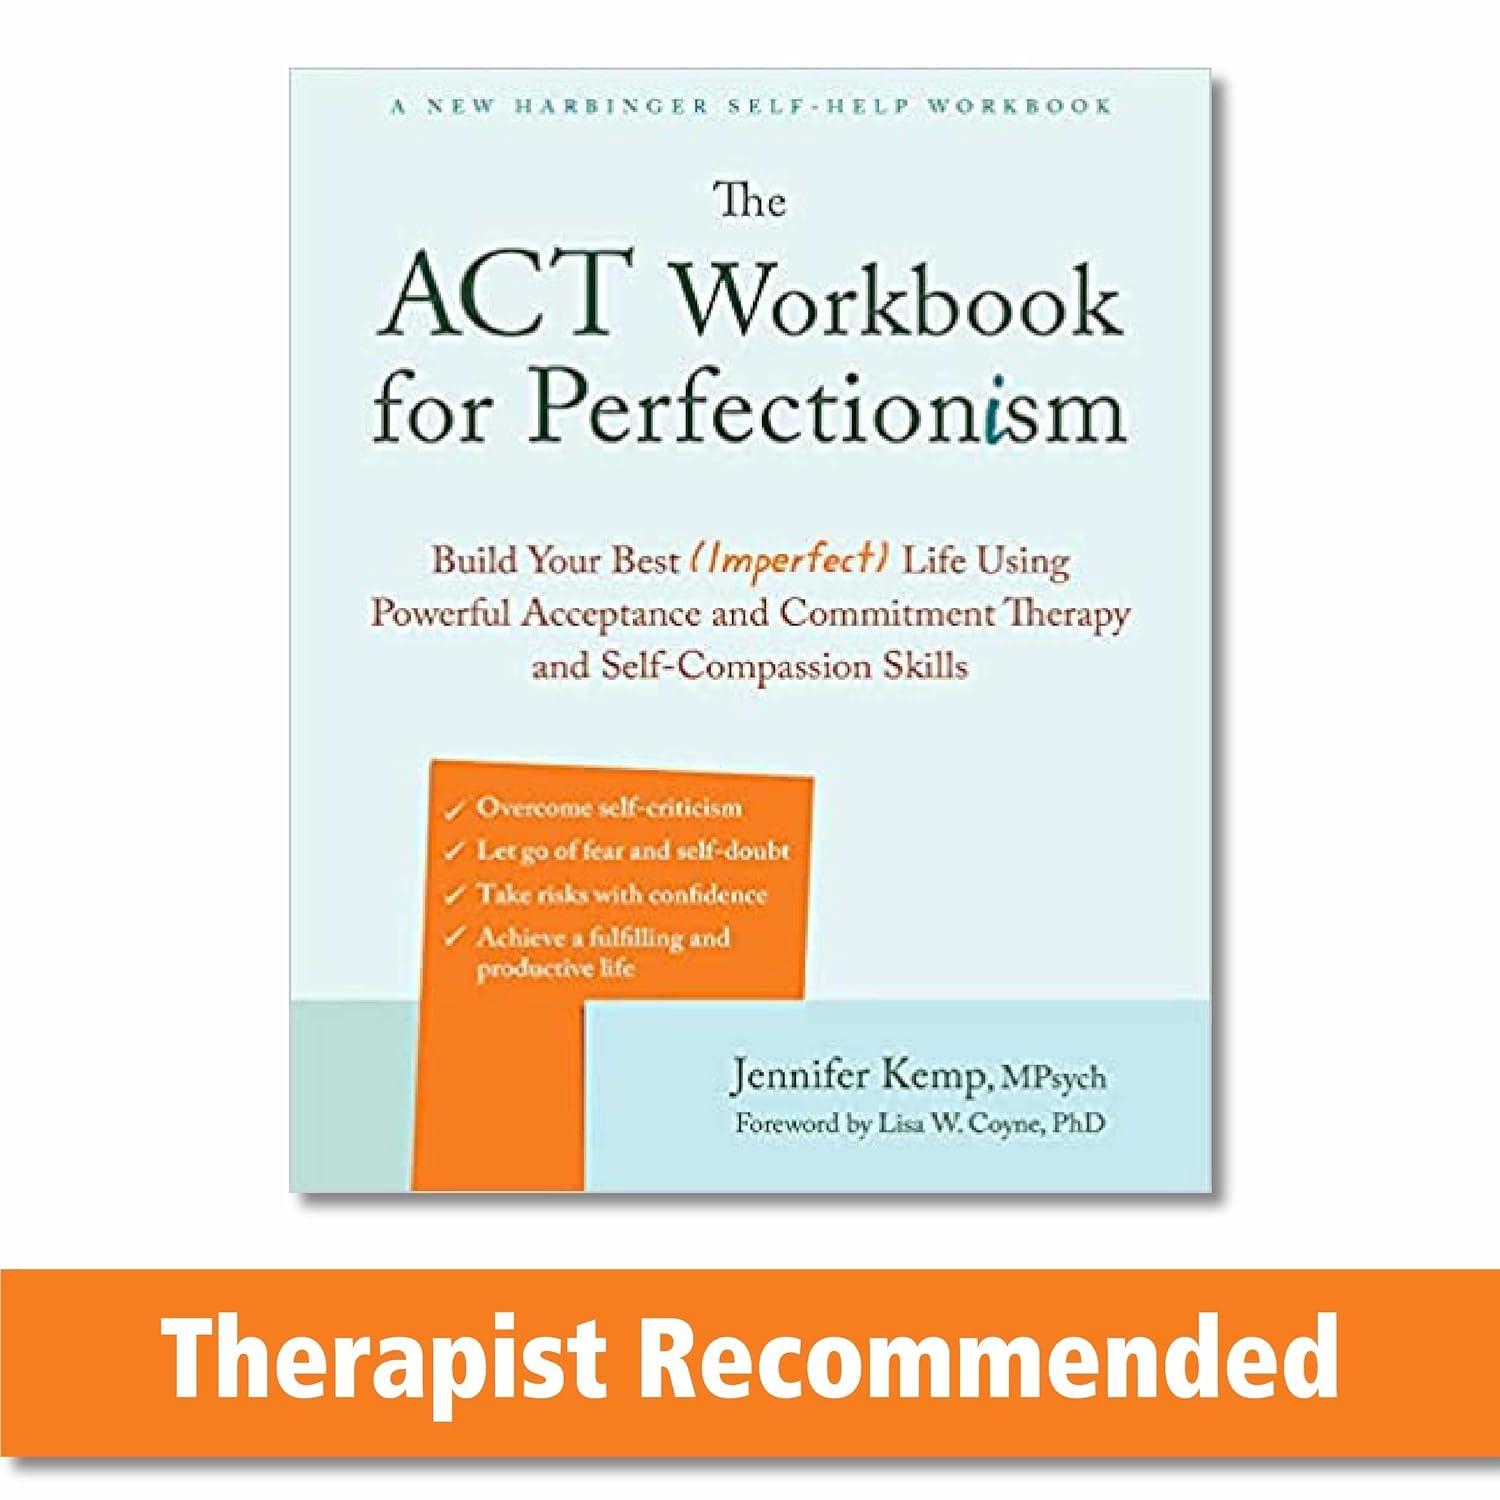 the act workbook for perfectionism build your best imperfect life using powerful acceptance and commitment